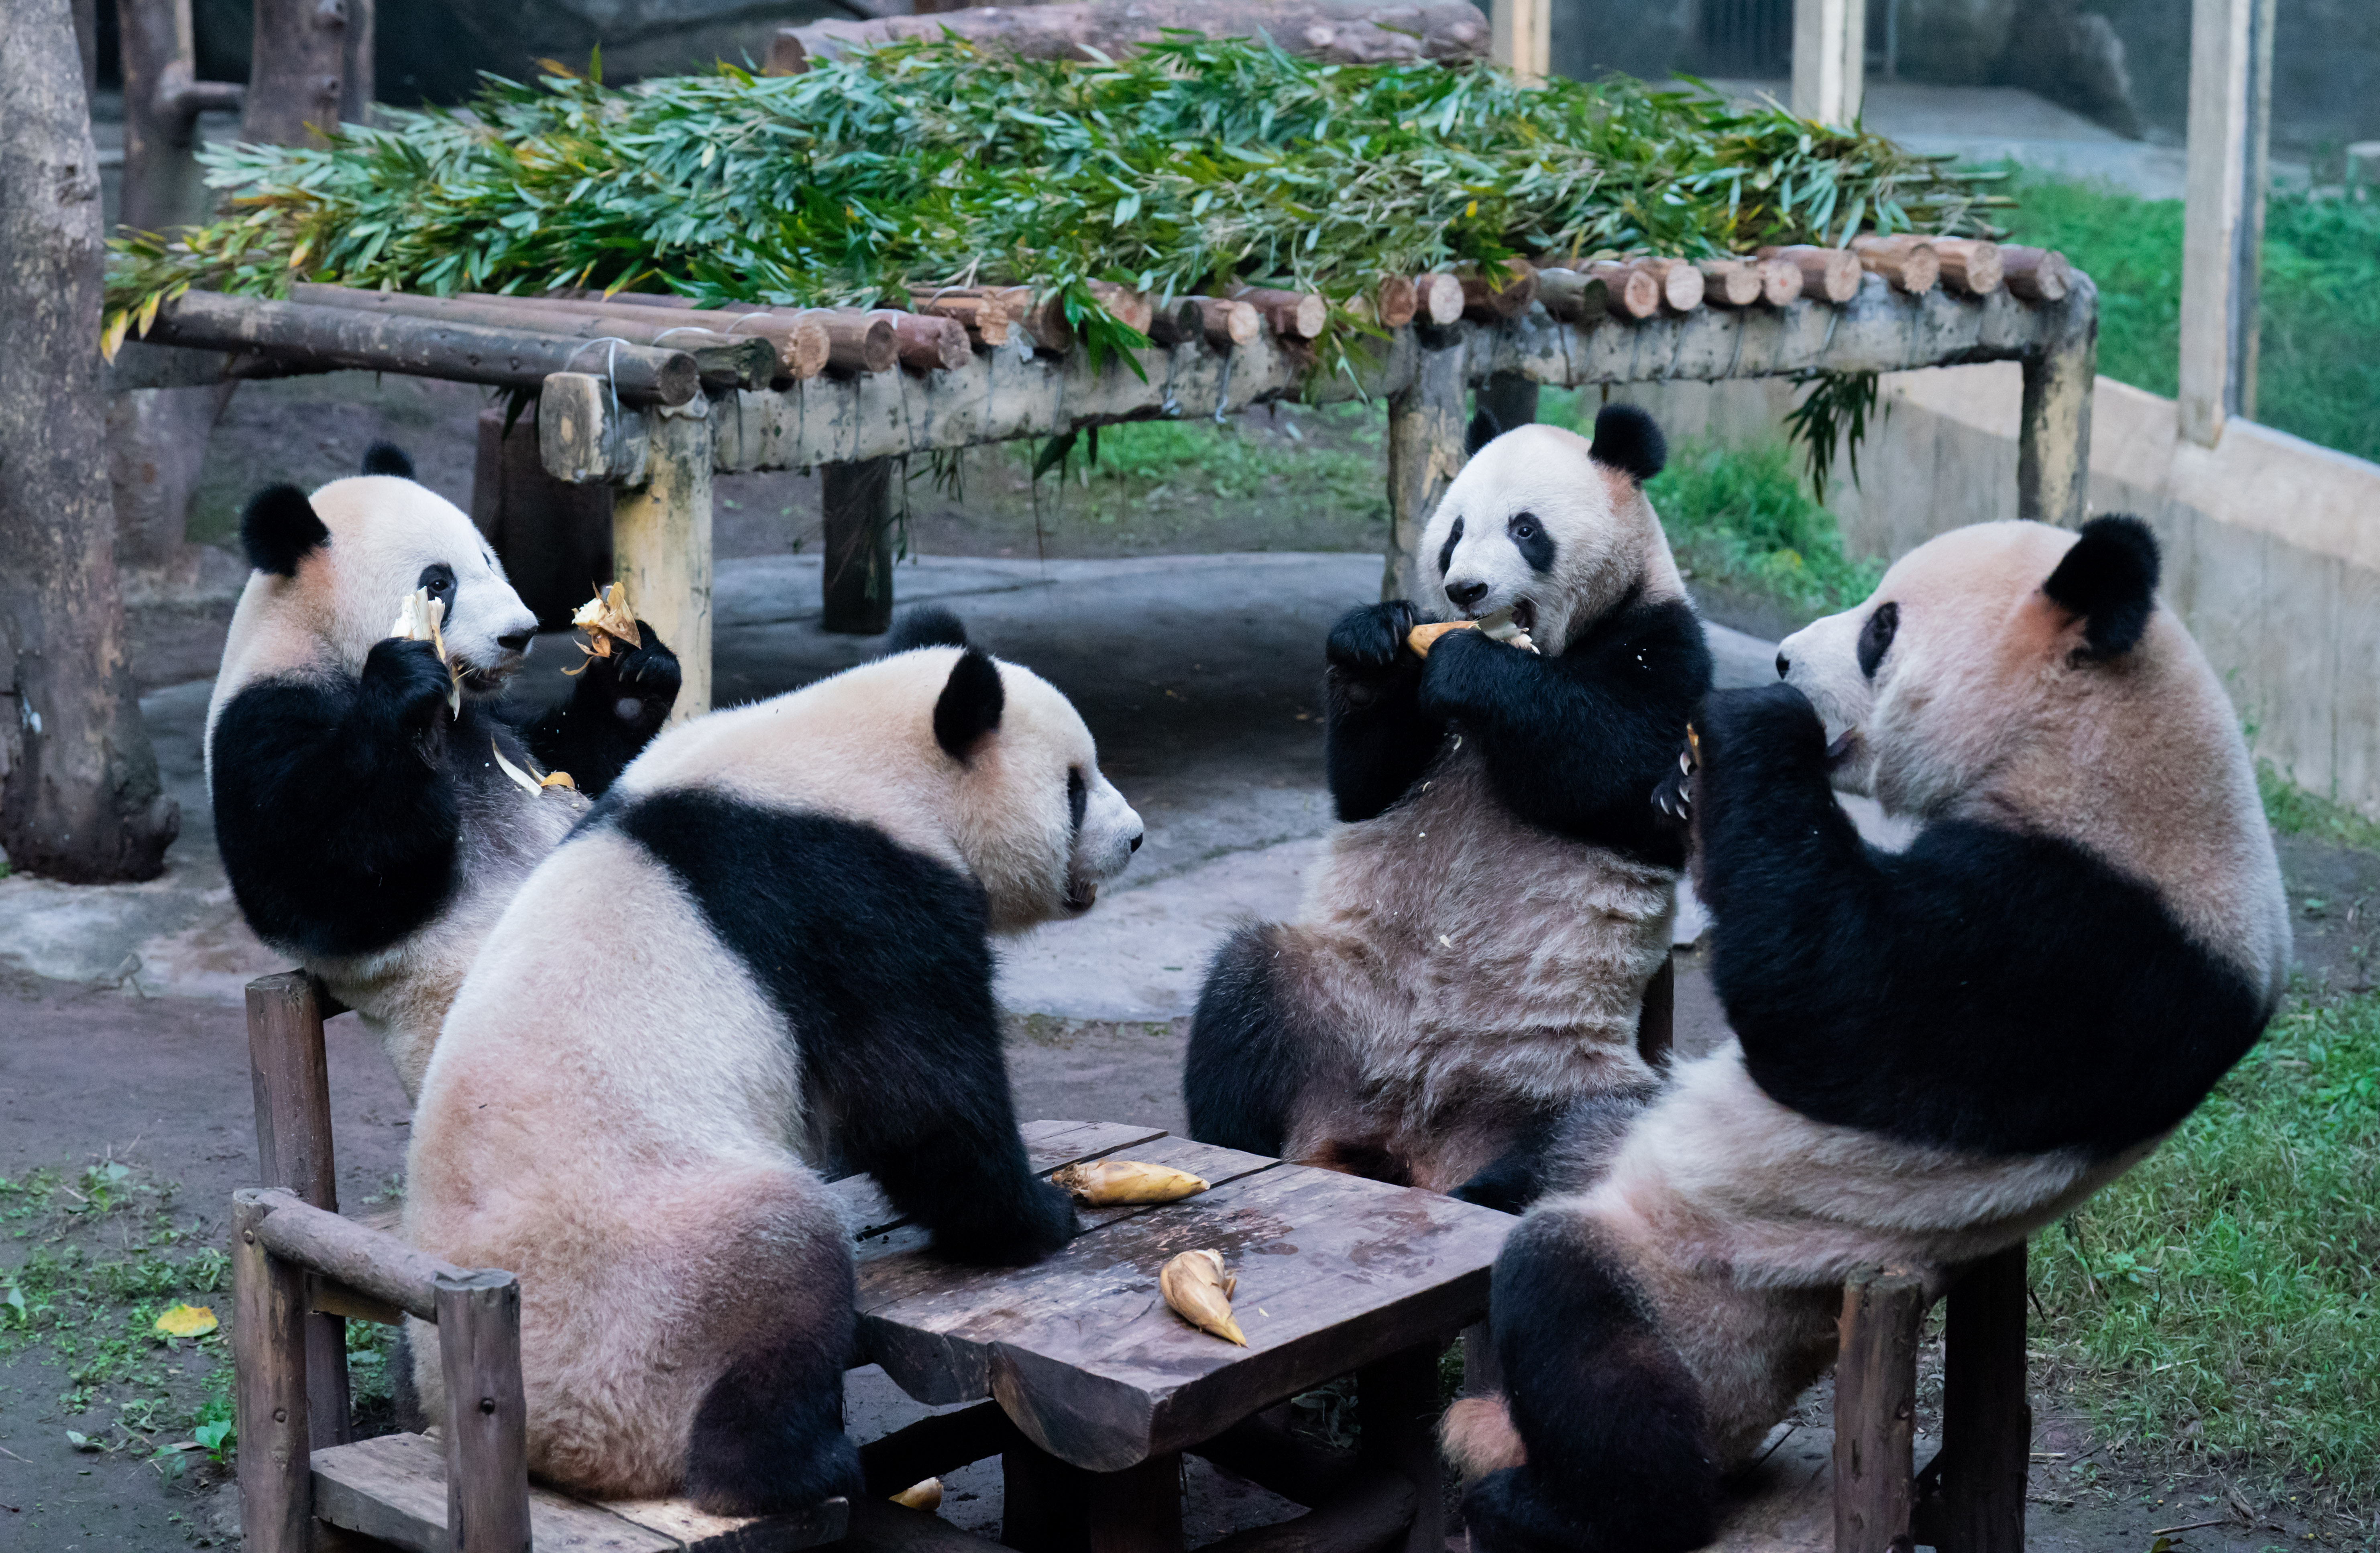 Images of pandas at a Chinese zoo has aroused suspicion of them being people in costumes.